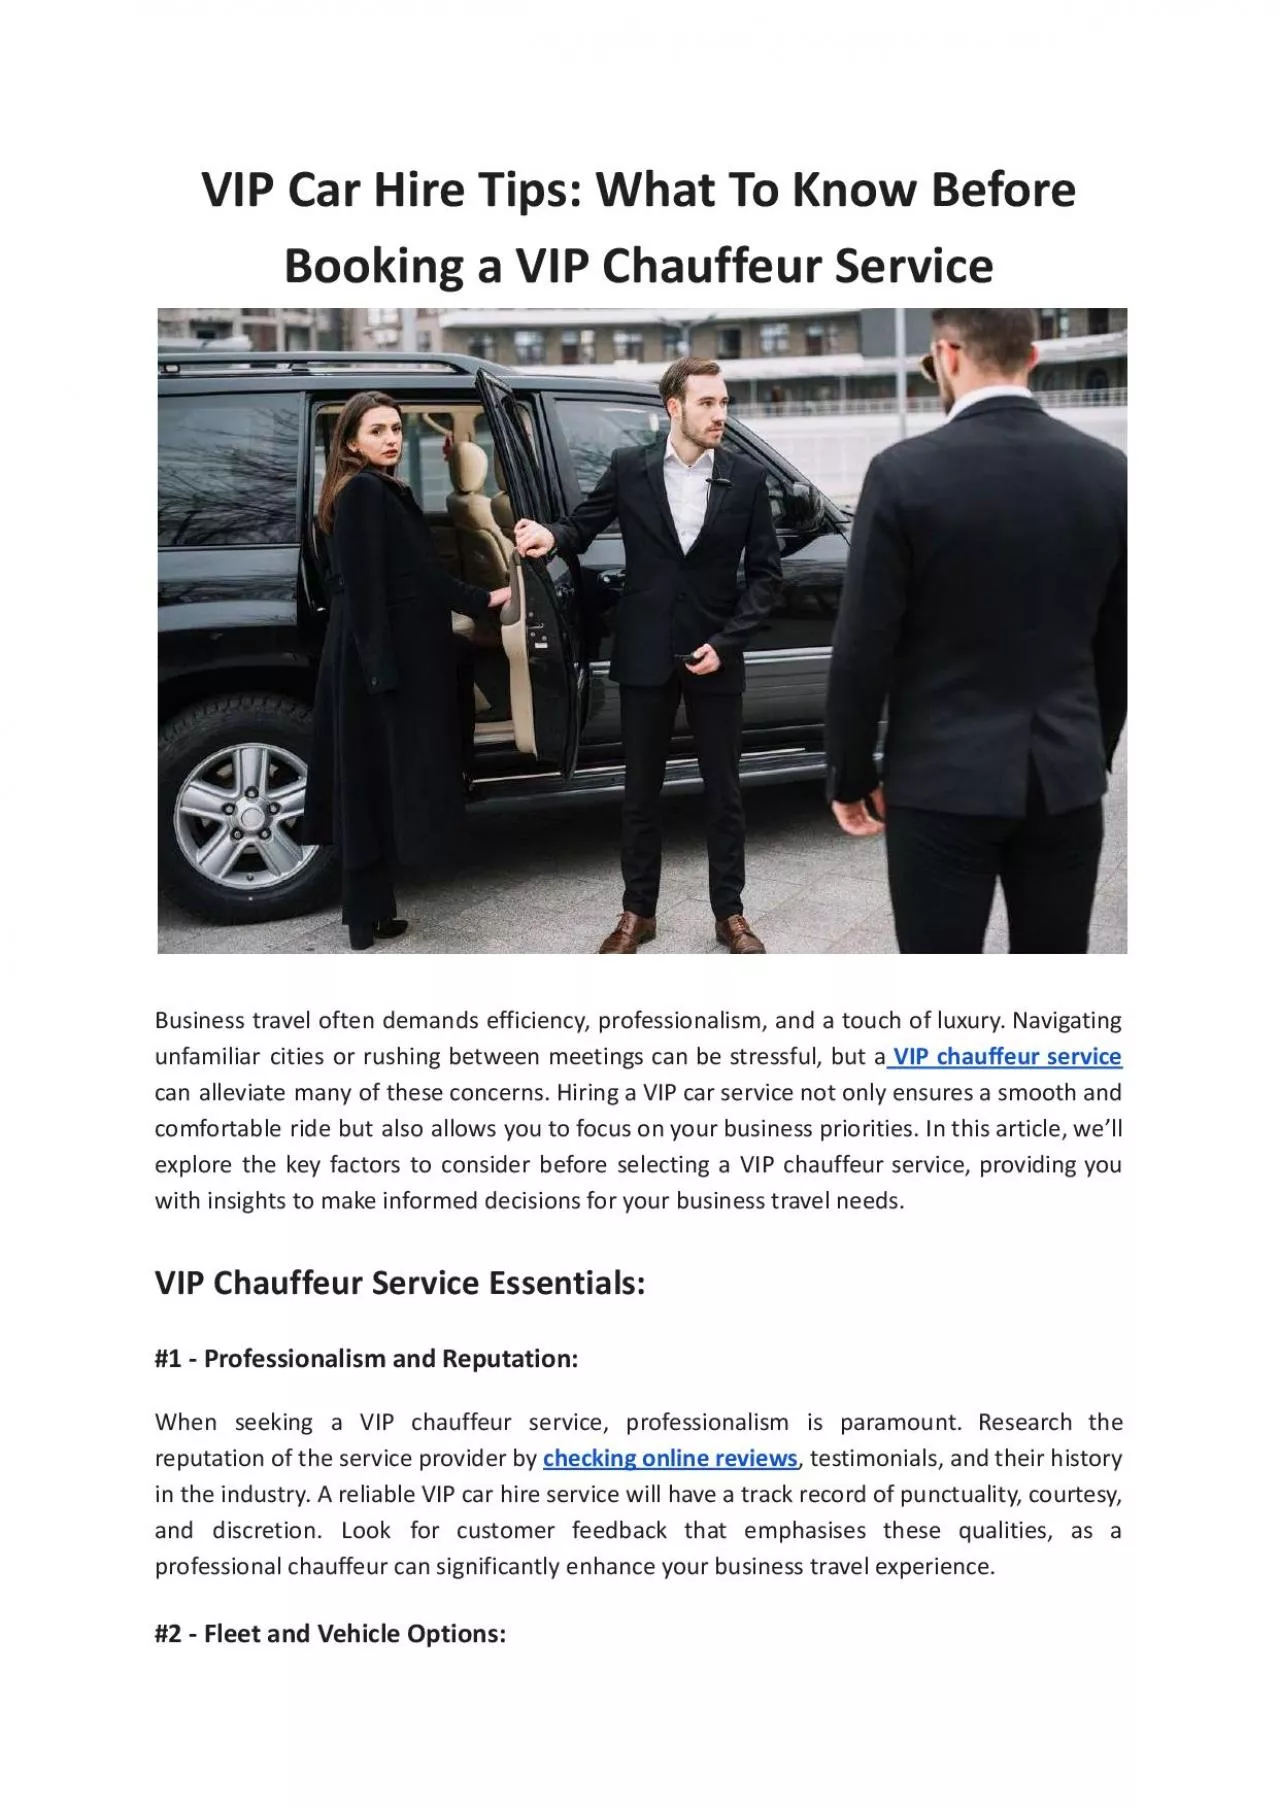 VIP Car Hire Tips - What To Know Before Booking a VIP Chauffeur Service